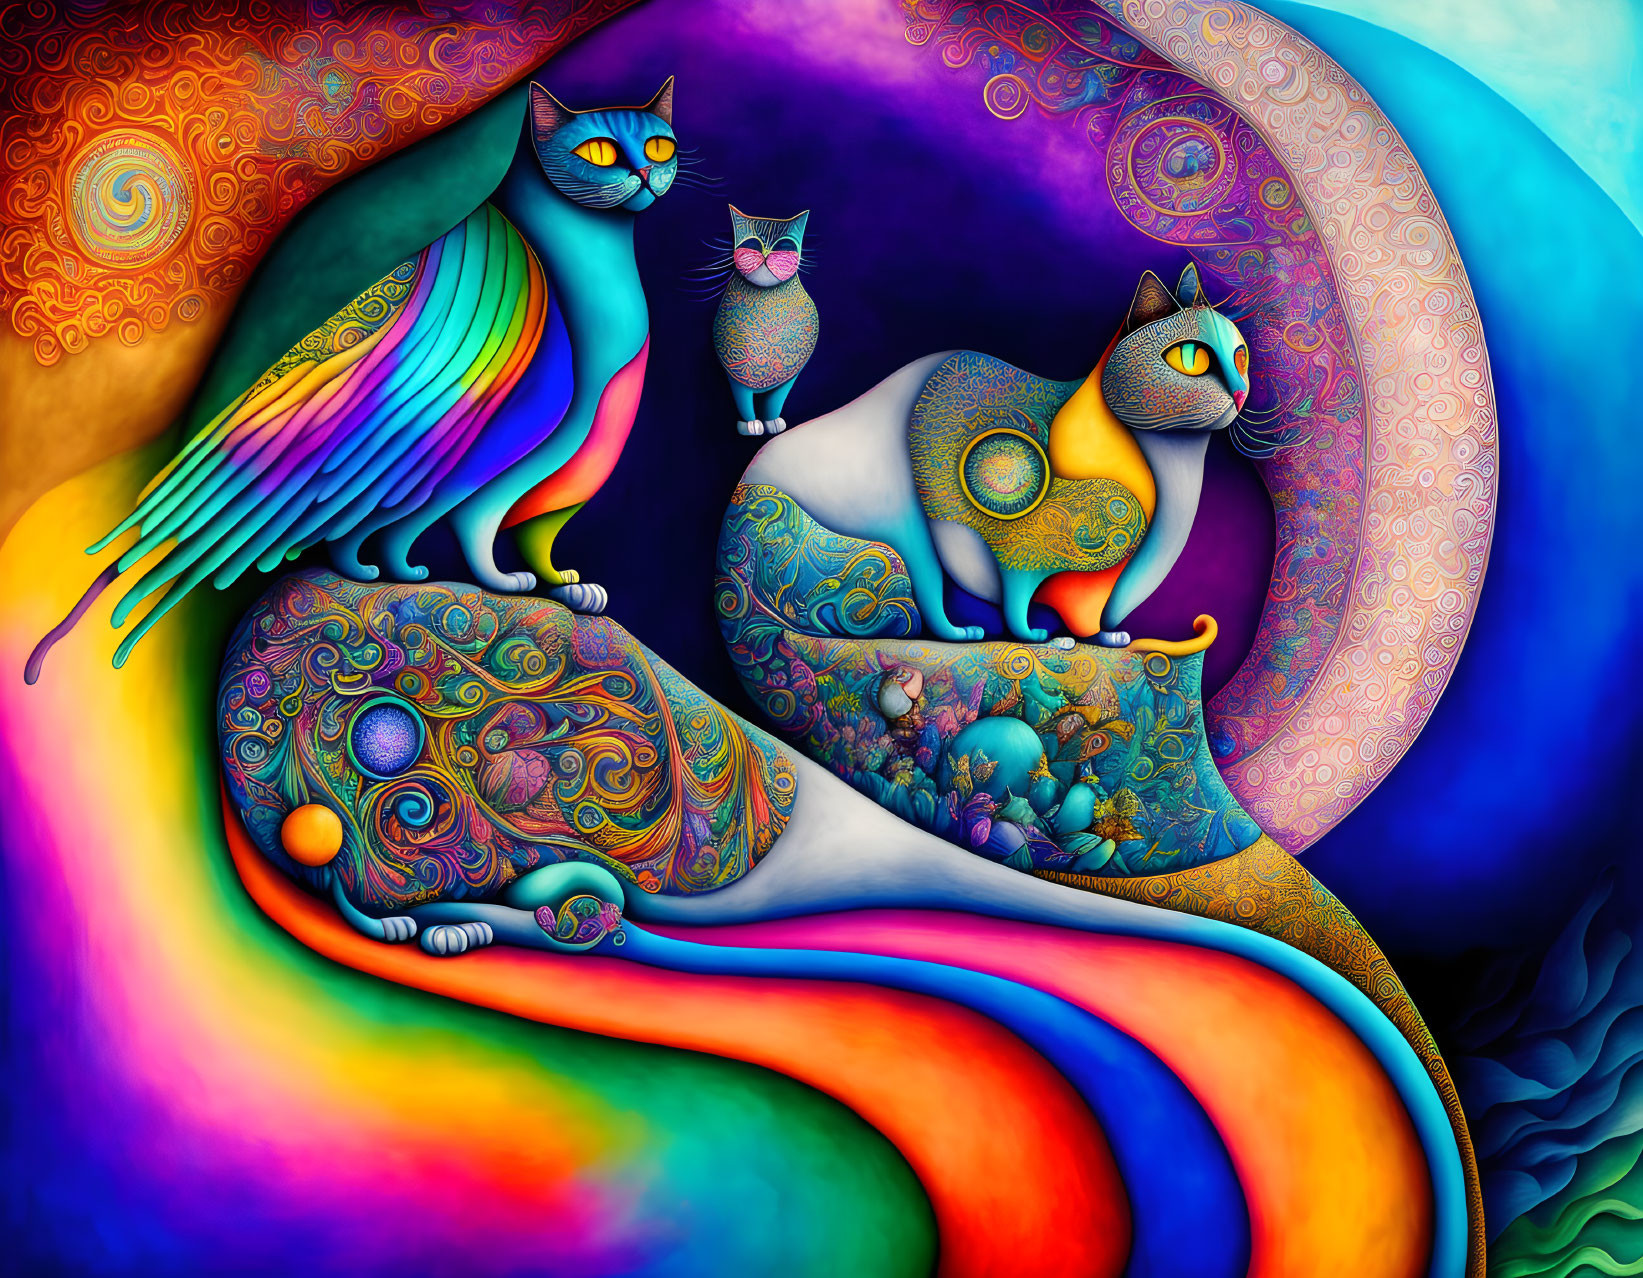 Colorful Psychedelic Illustration of Three Stylized Cats With Rainbow Swirls